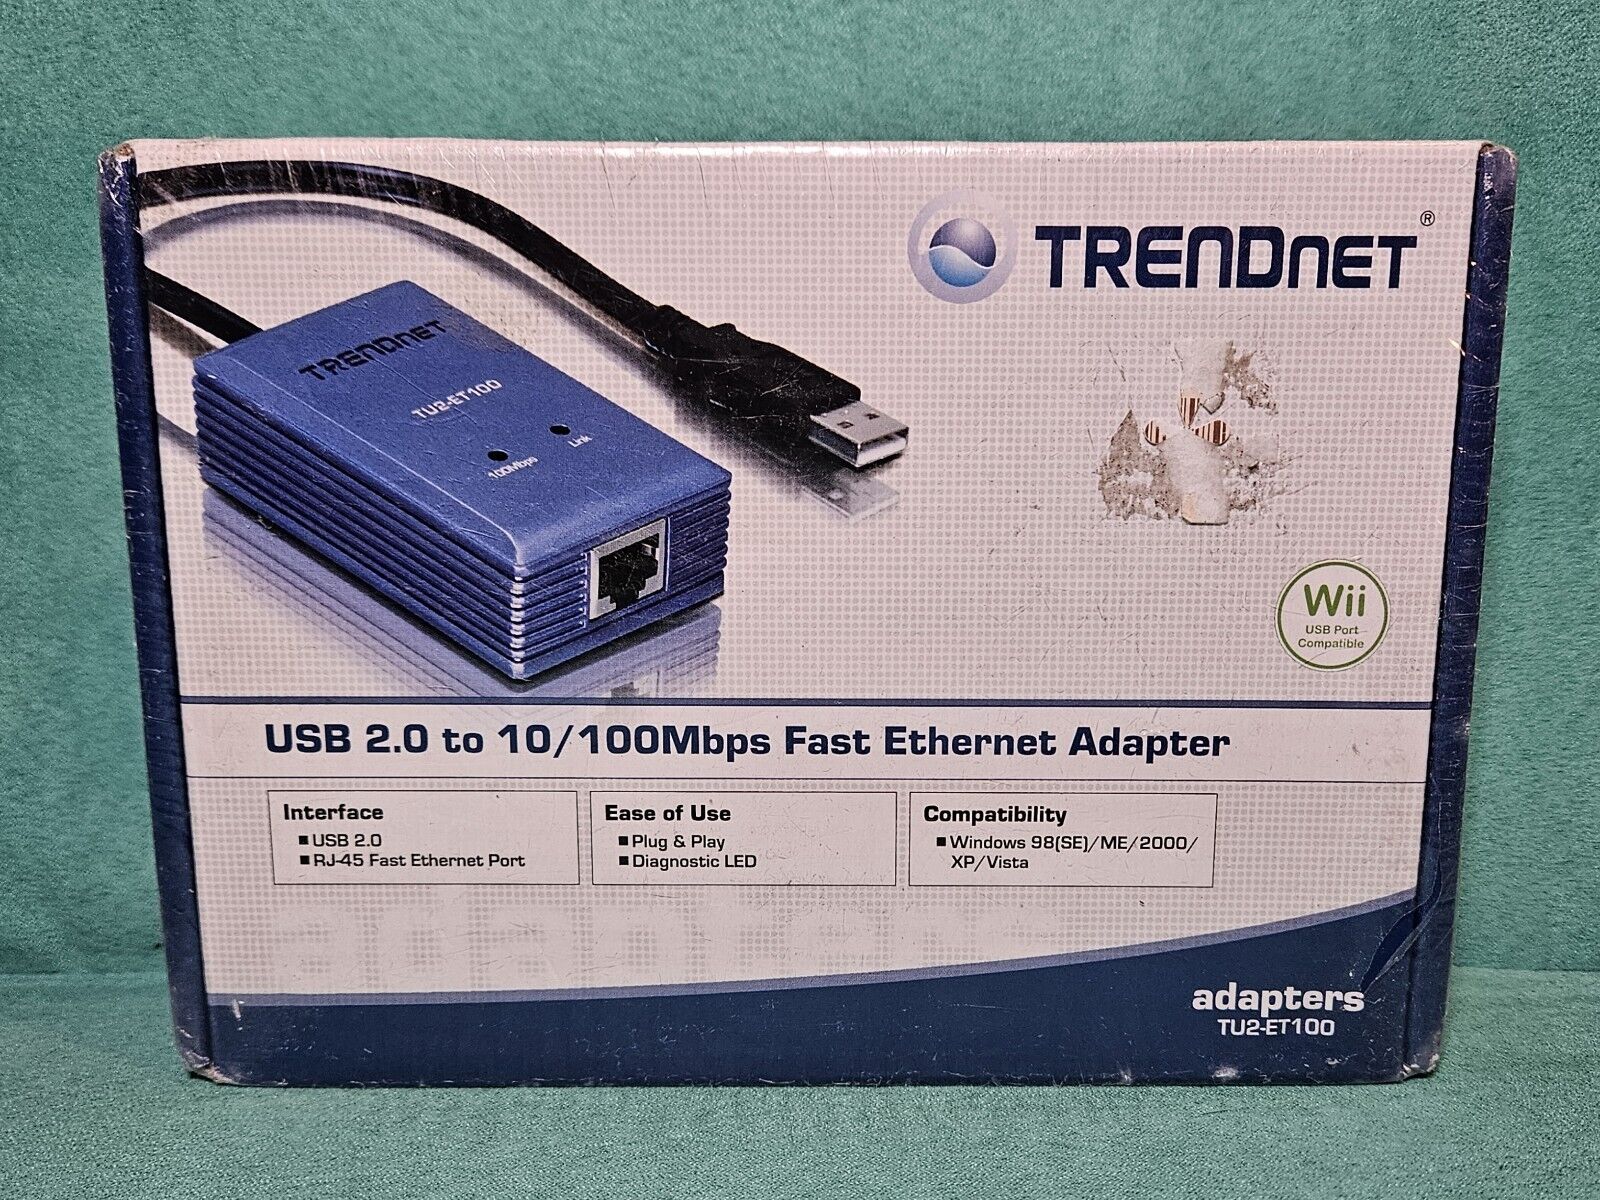 TRENDnet TU2-ET100 USB to 10/100Mbps Adapter (Wii USB Compatible)*FREE SHIPPING*